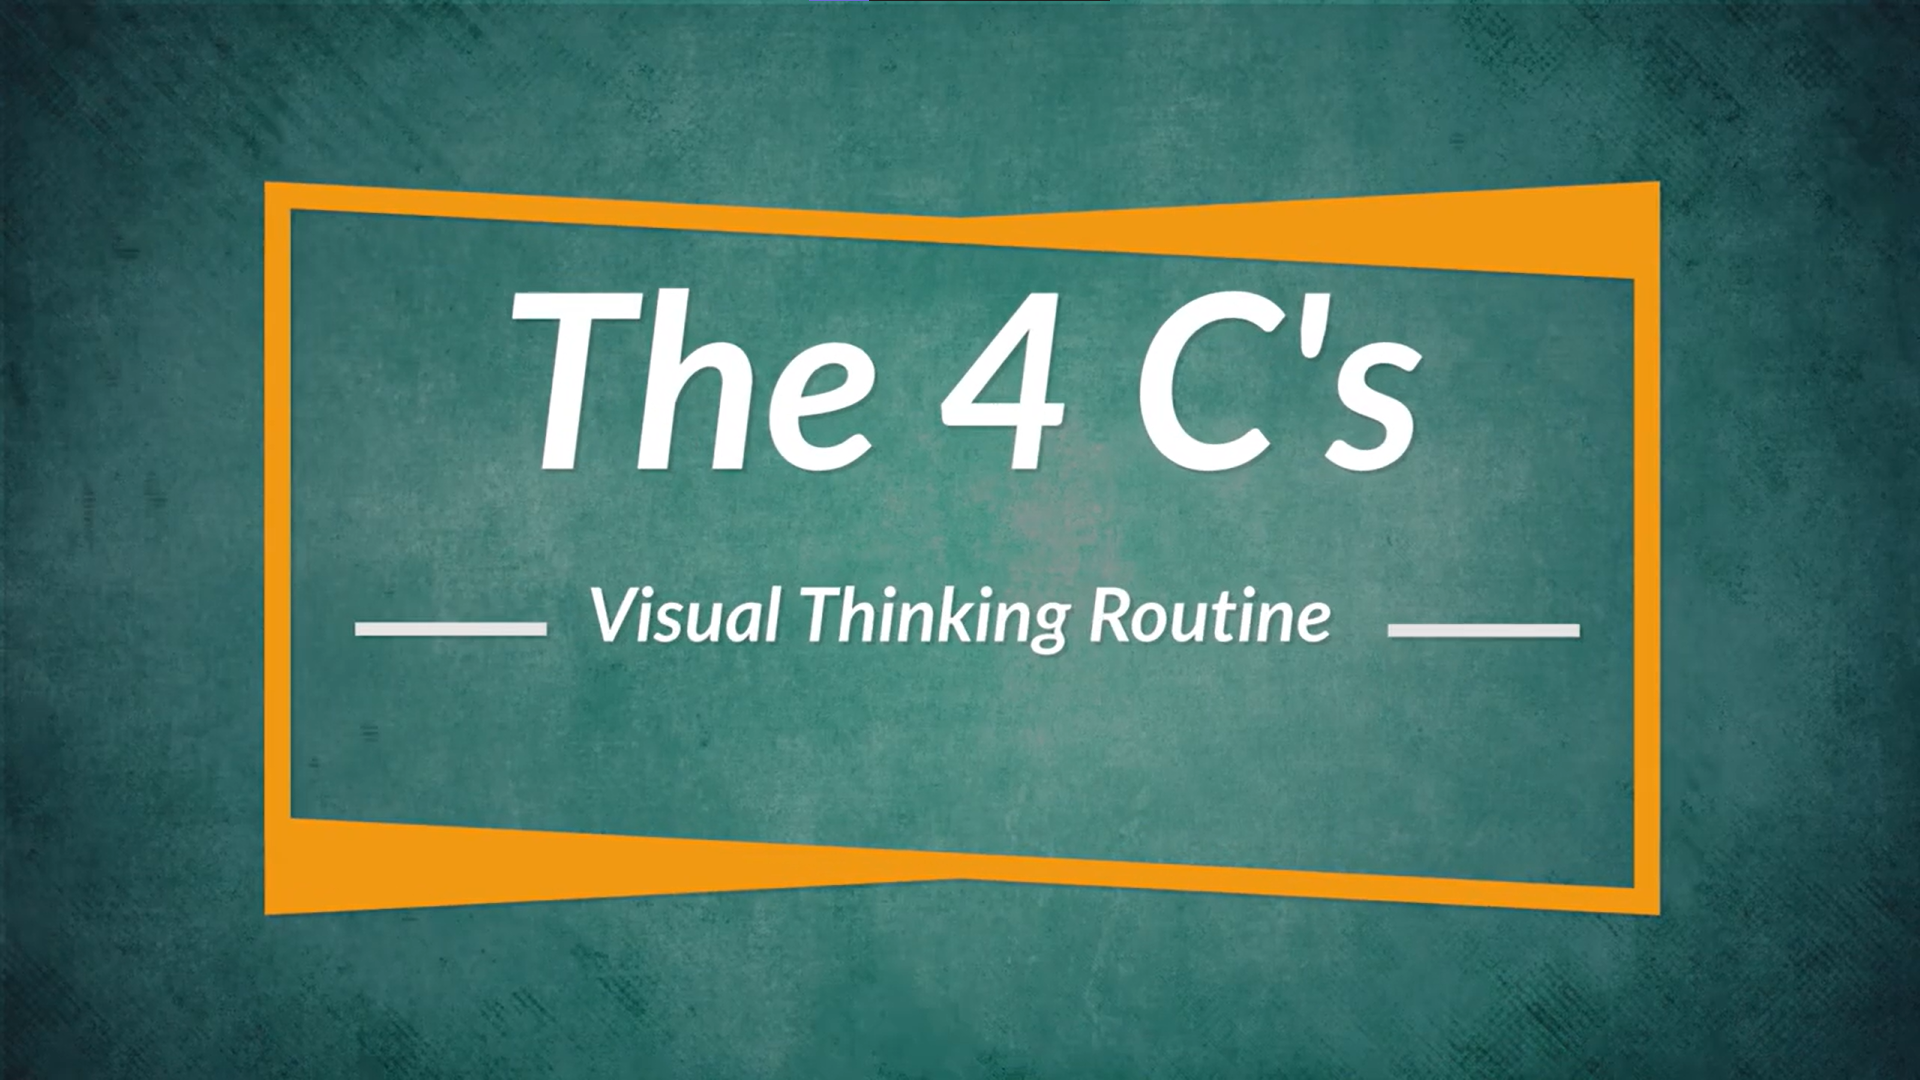 Cover image for the "Four C's" Visual Thinking Strategy